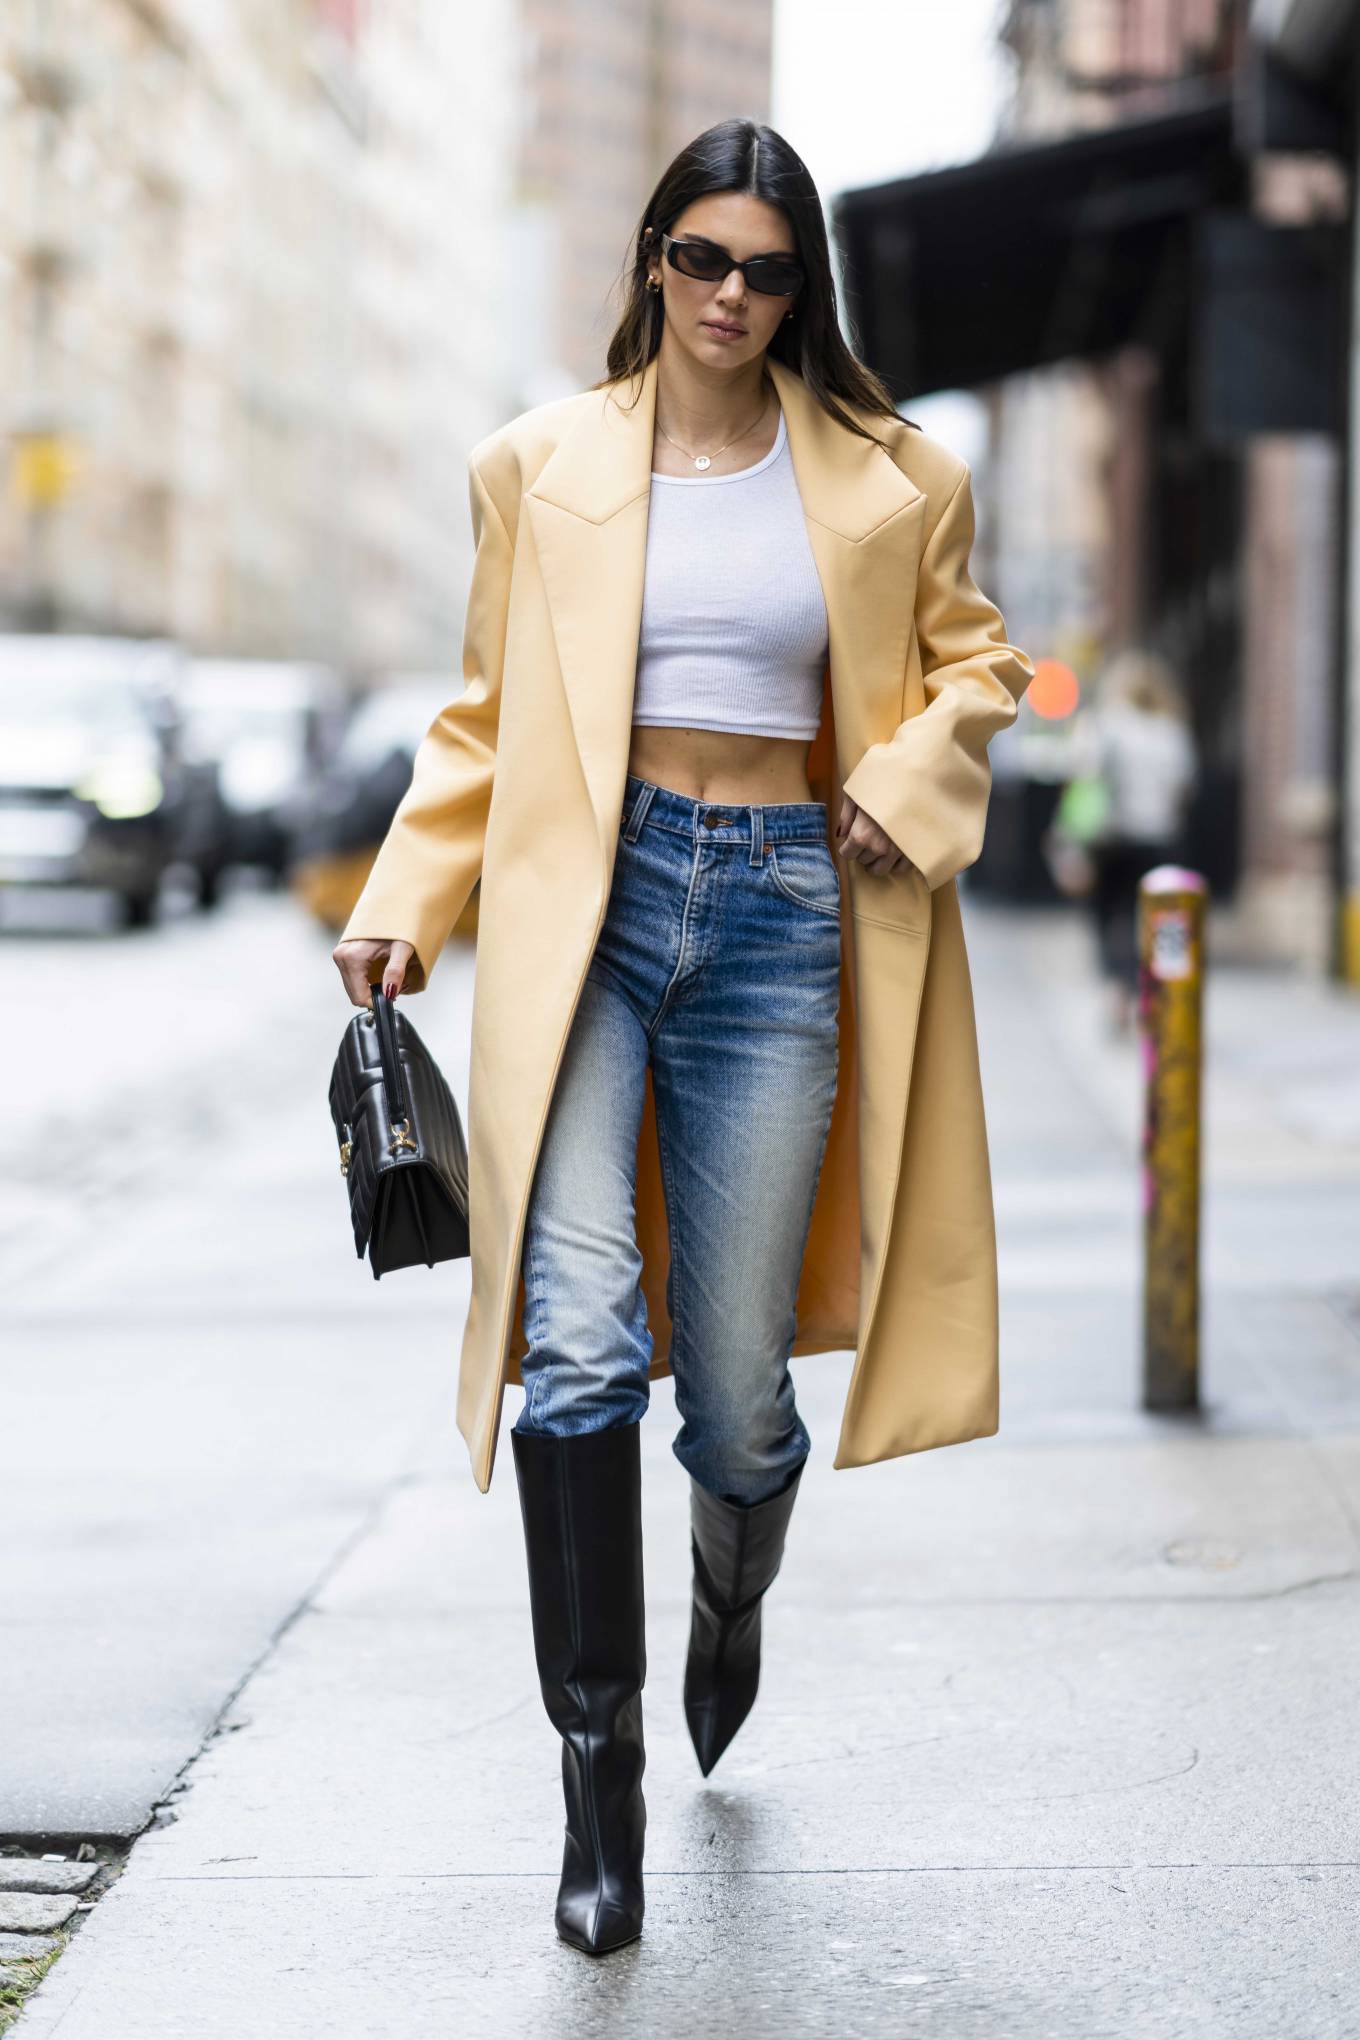 Kendall Jenner 2022 : Kendall Jenner – Out in New York-02